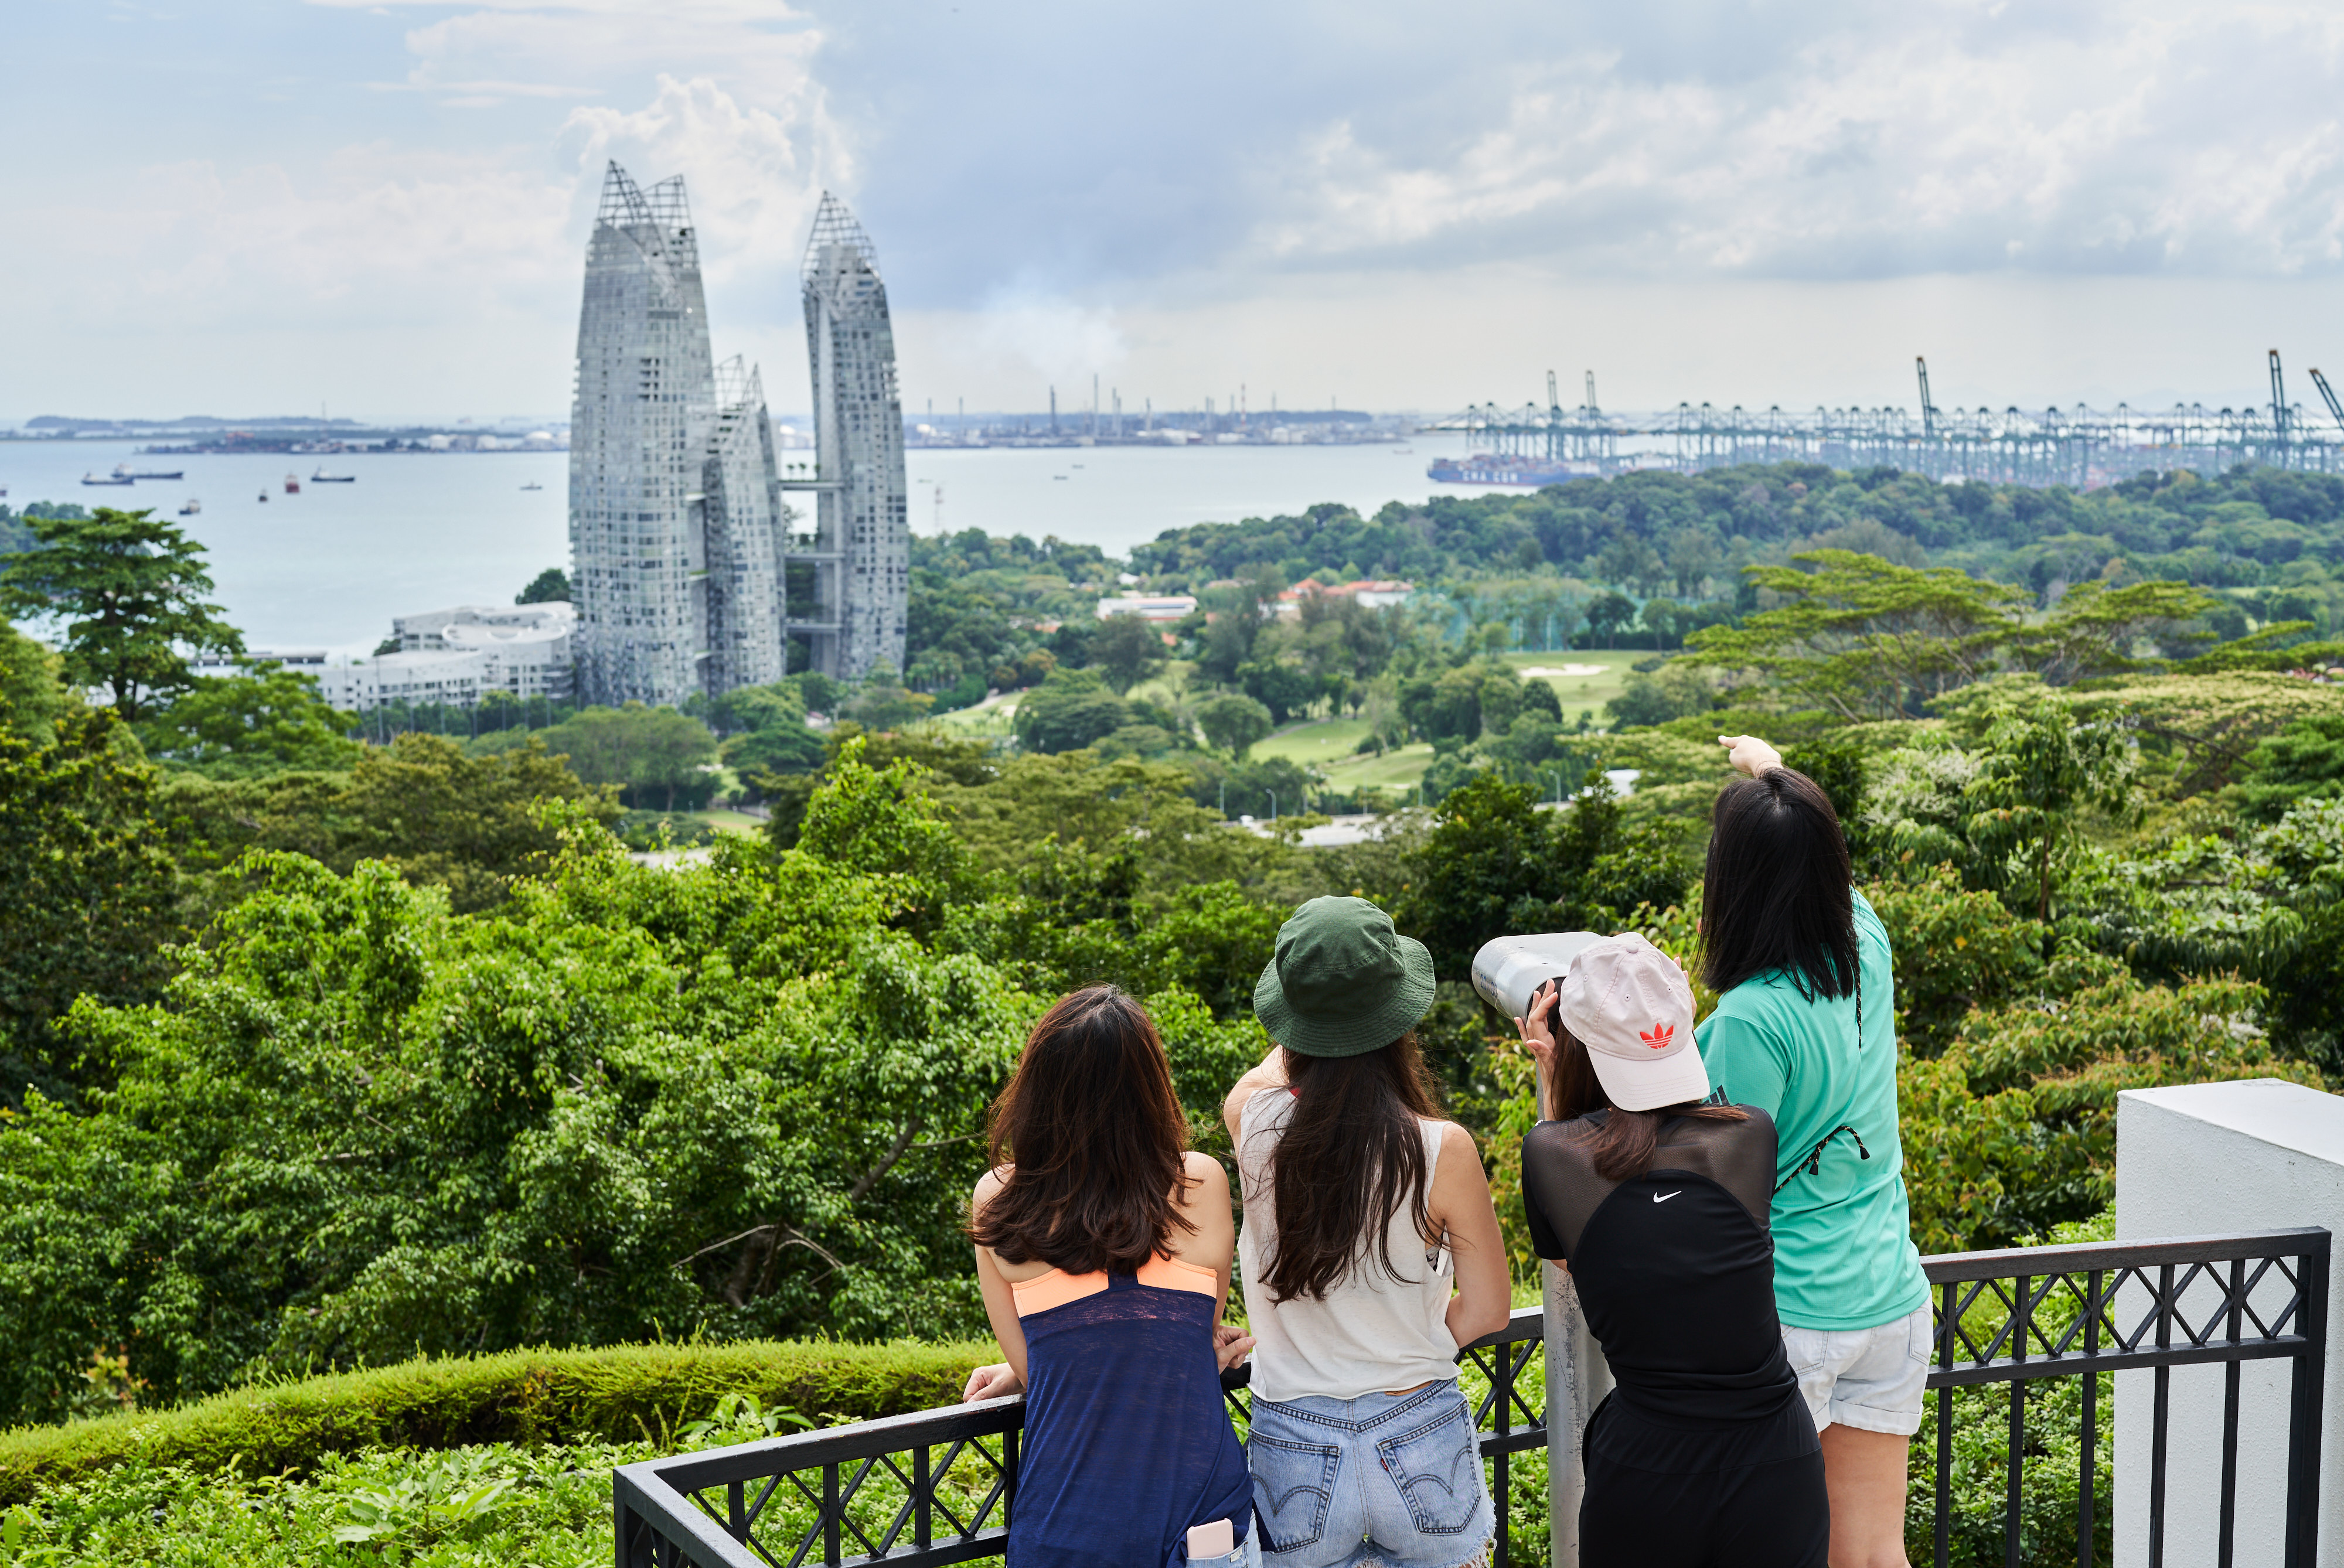 Enjoy a day out with your family while learning more about Singapore’s background